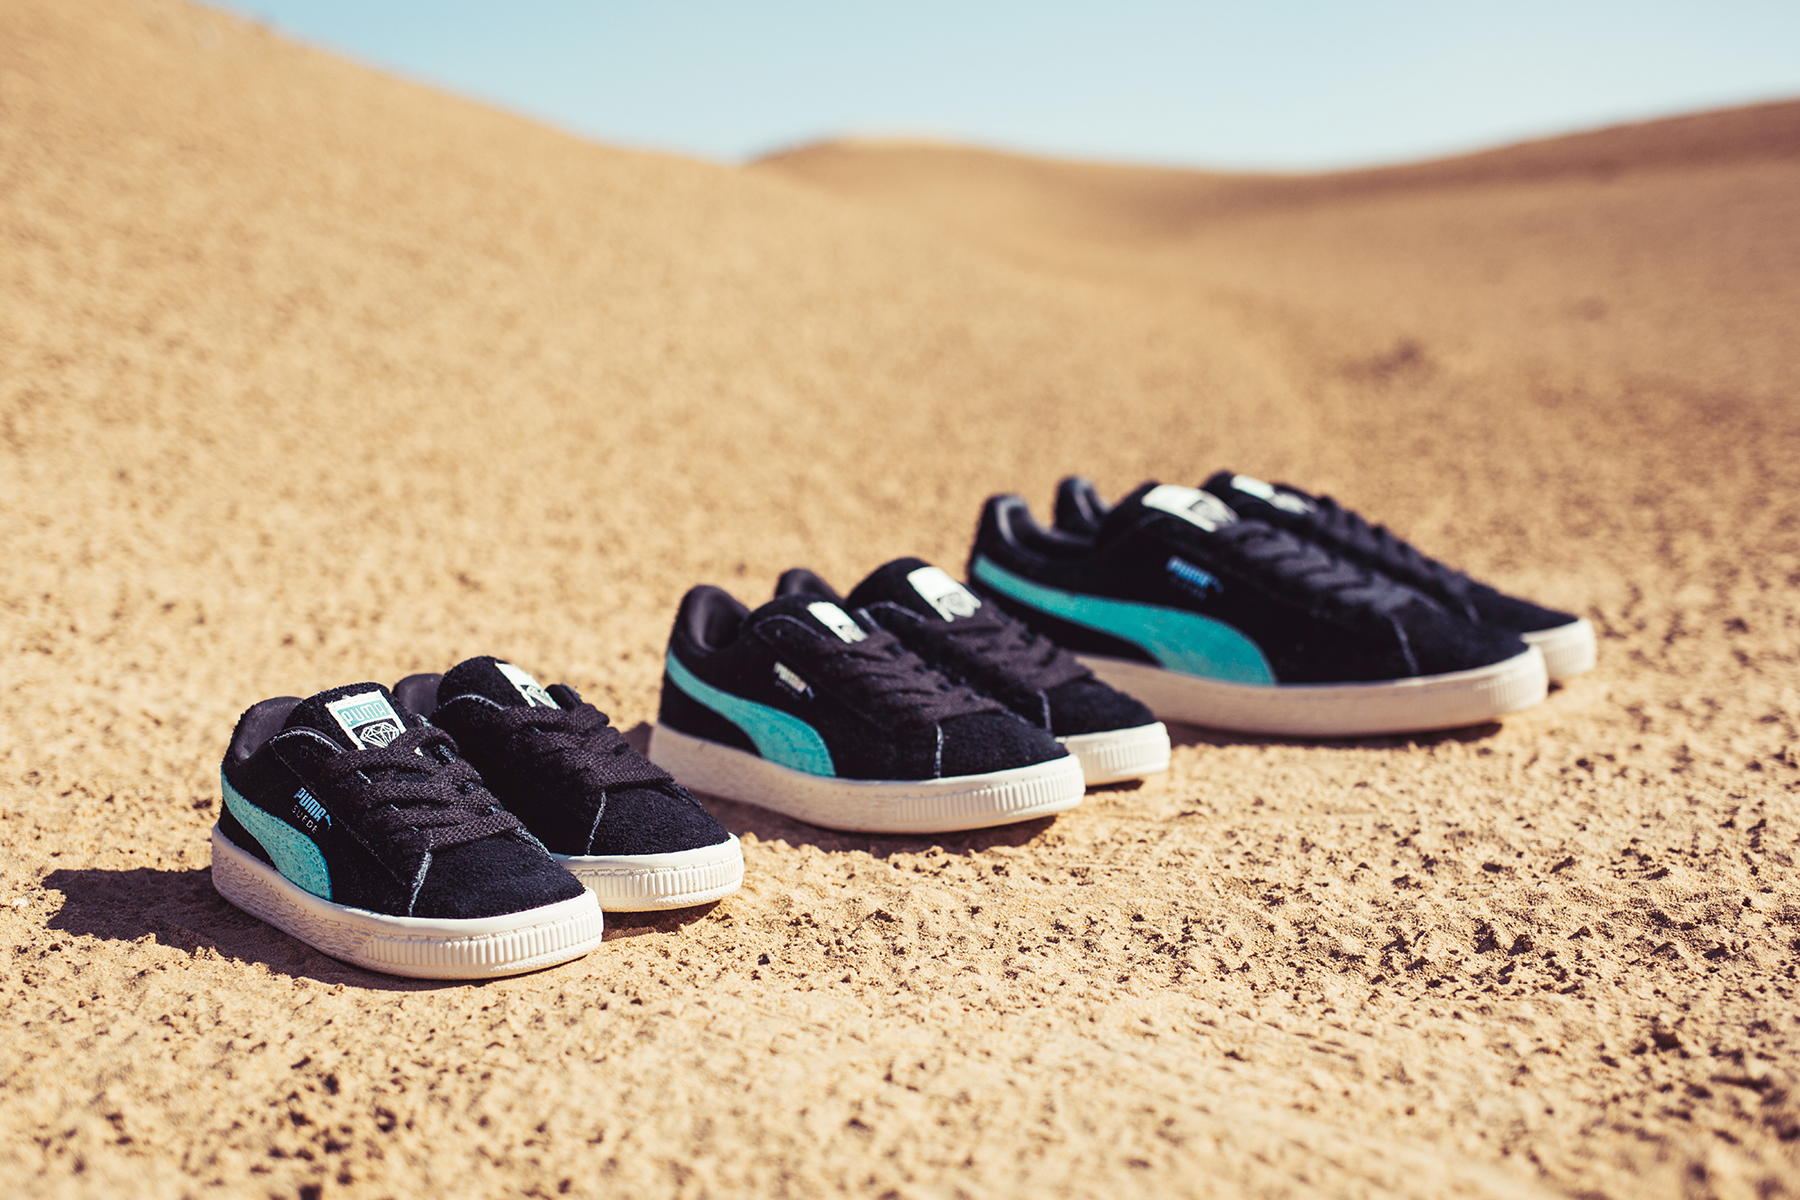 Puma and Diamond Supply Co. Team Up for 